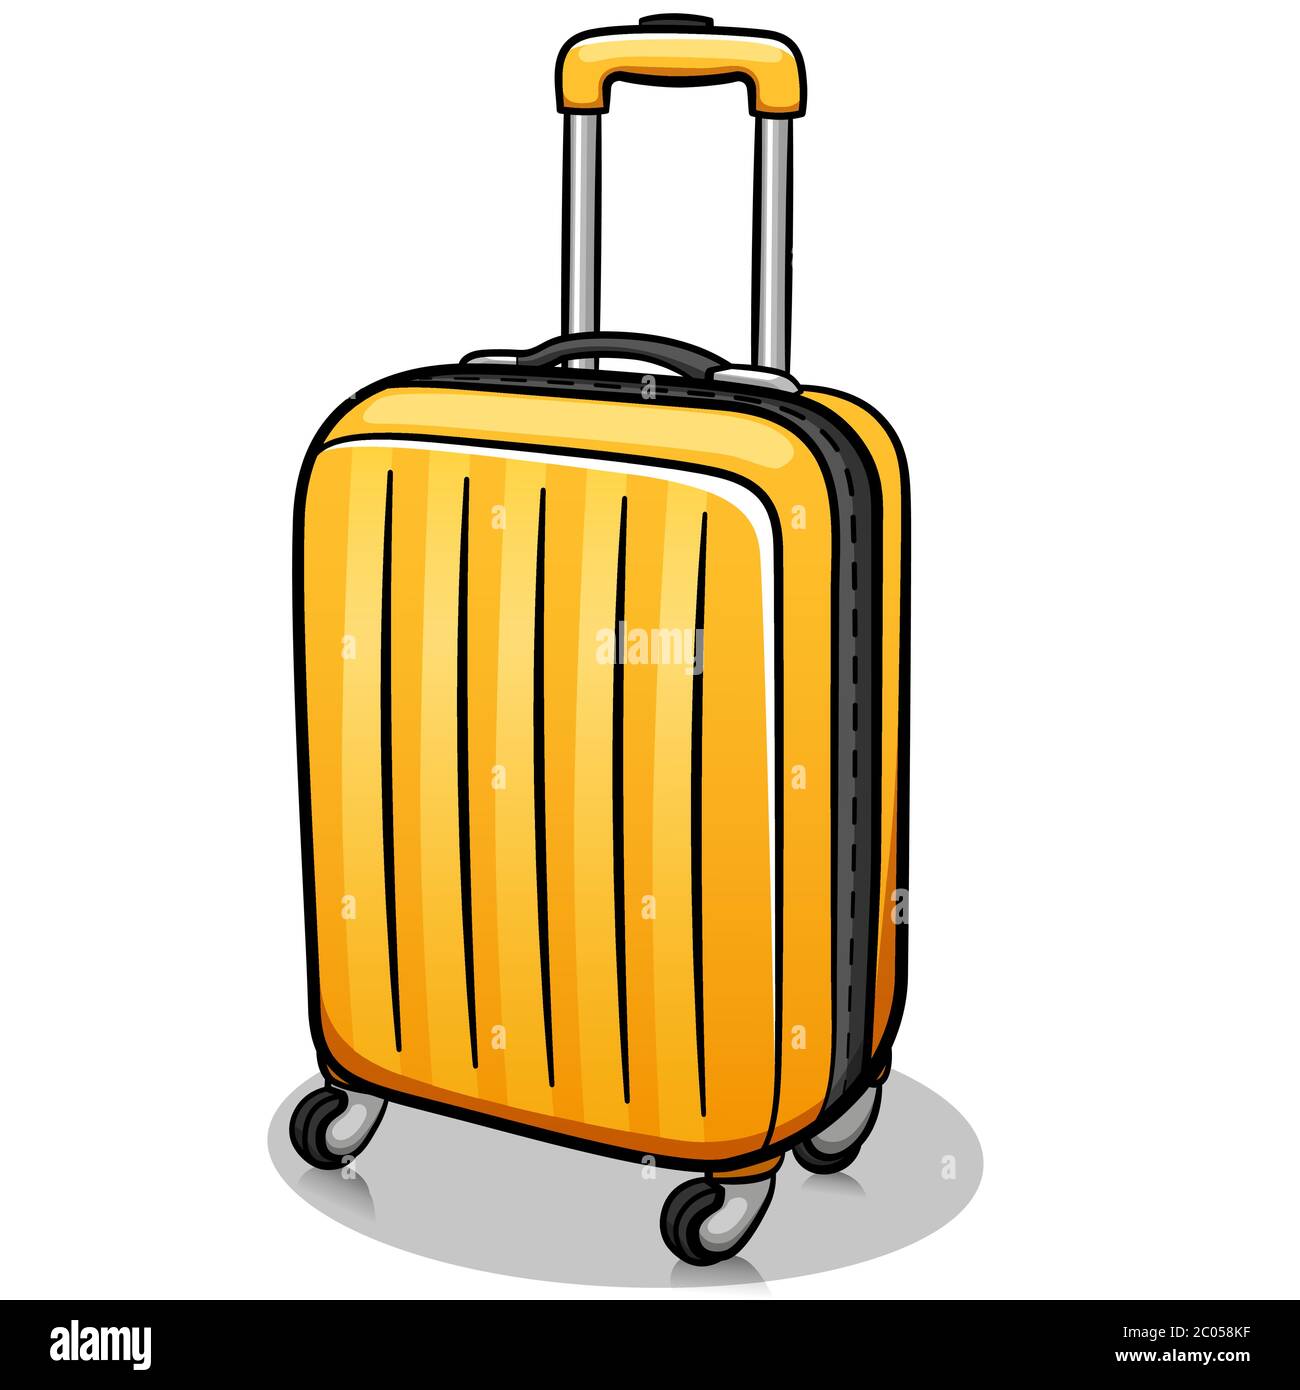 Vector illustration of suitcase cartoon isolated design Stock Vector